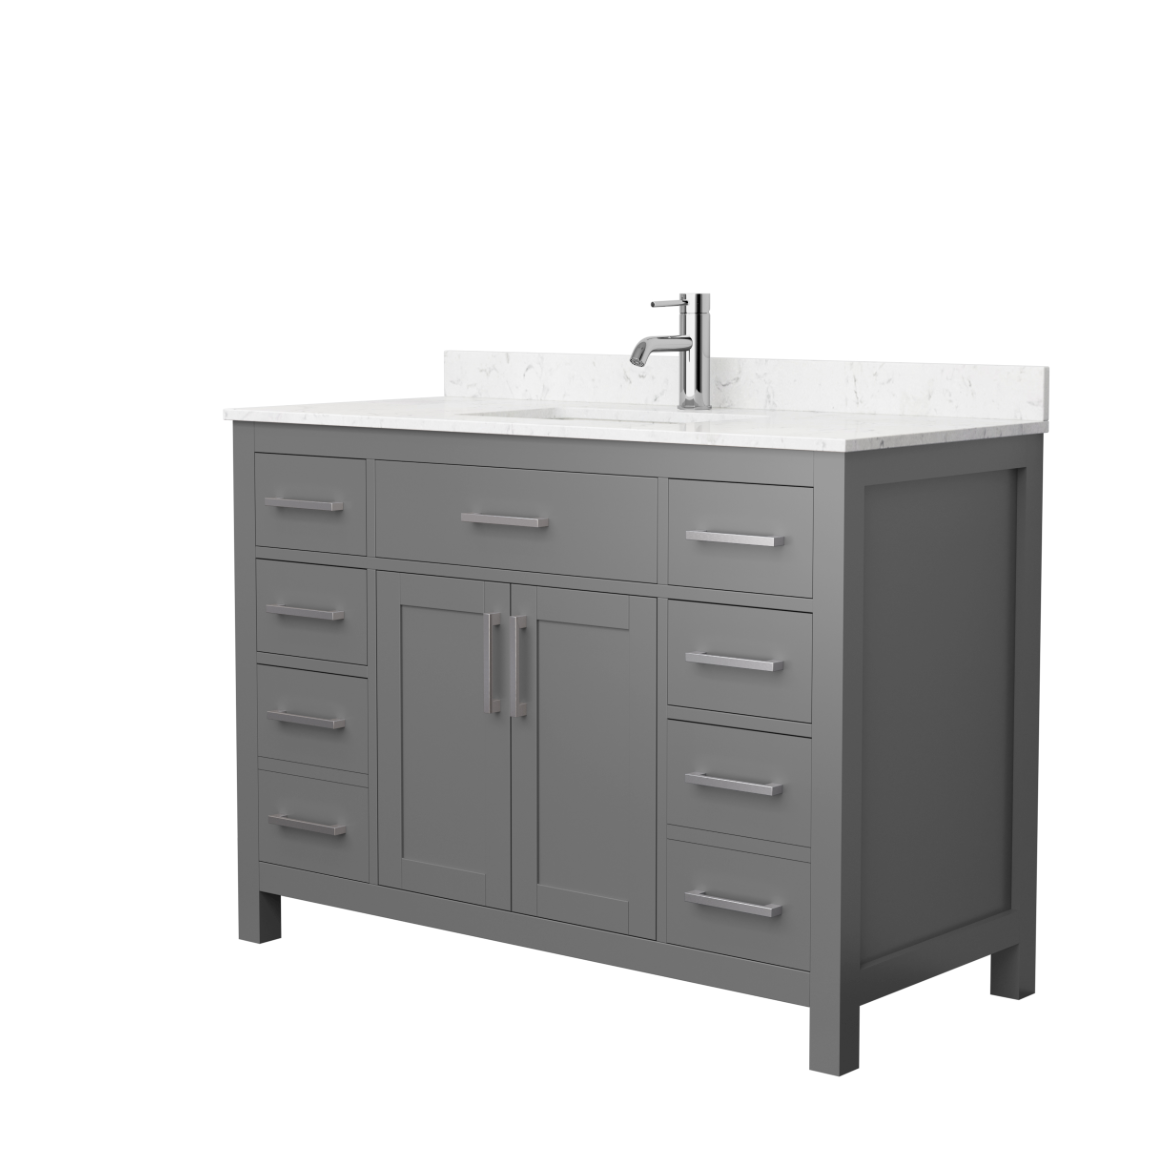 48" Single Bathroom Vanity in Dark Gray or White, Carrara Cultured Marble Countertop, Undermount Square Sink, Brushed Gold Trim  